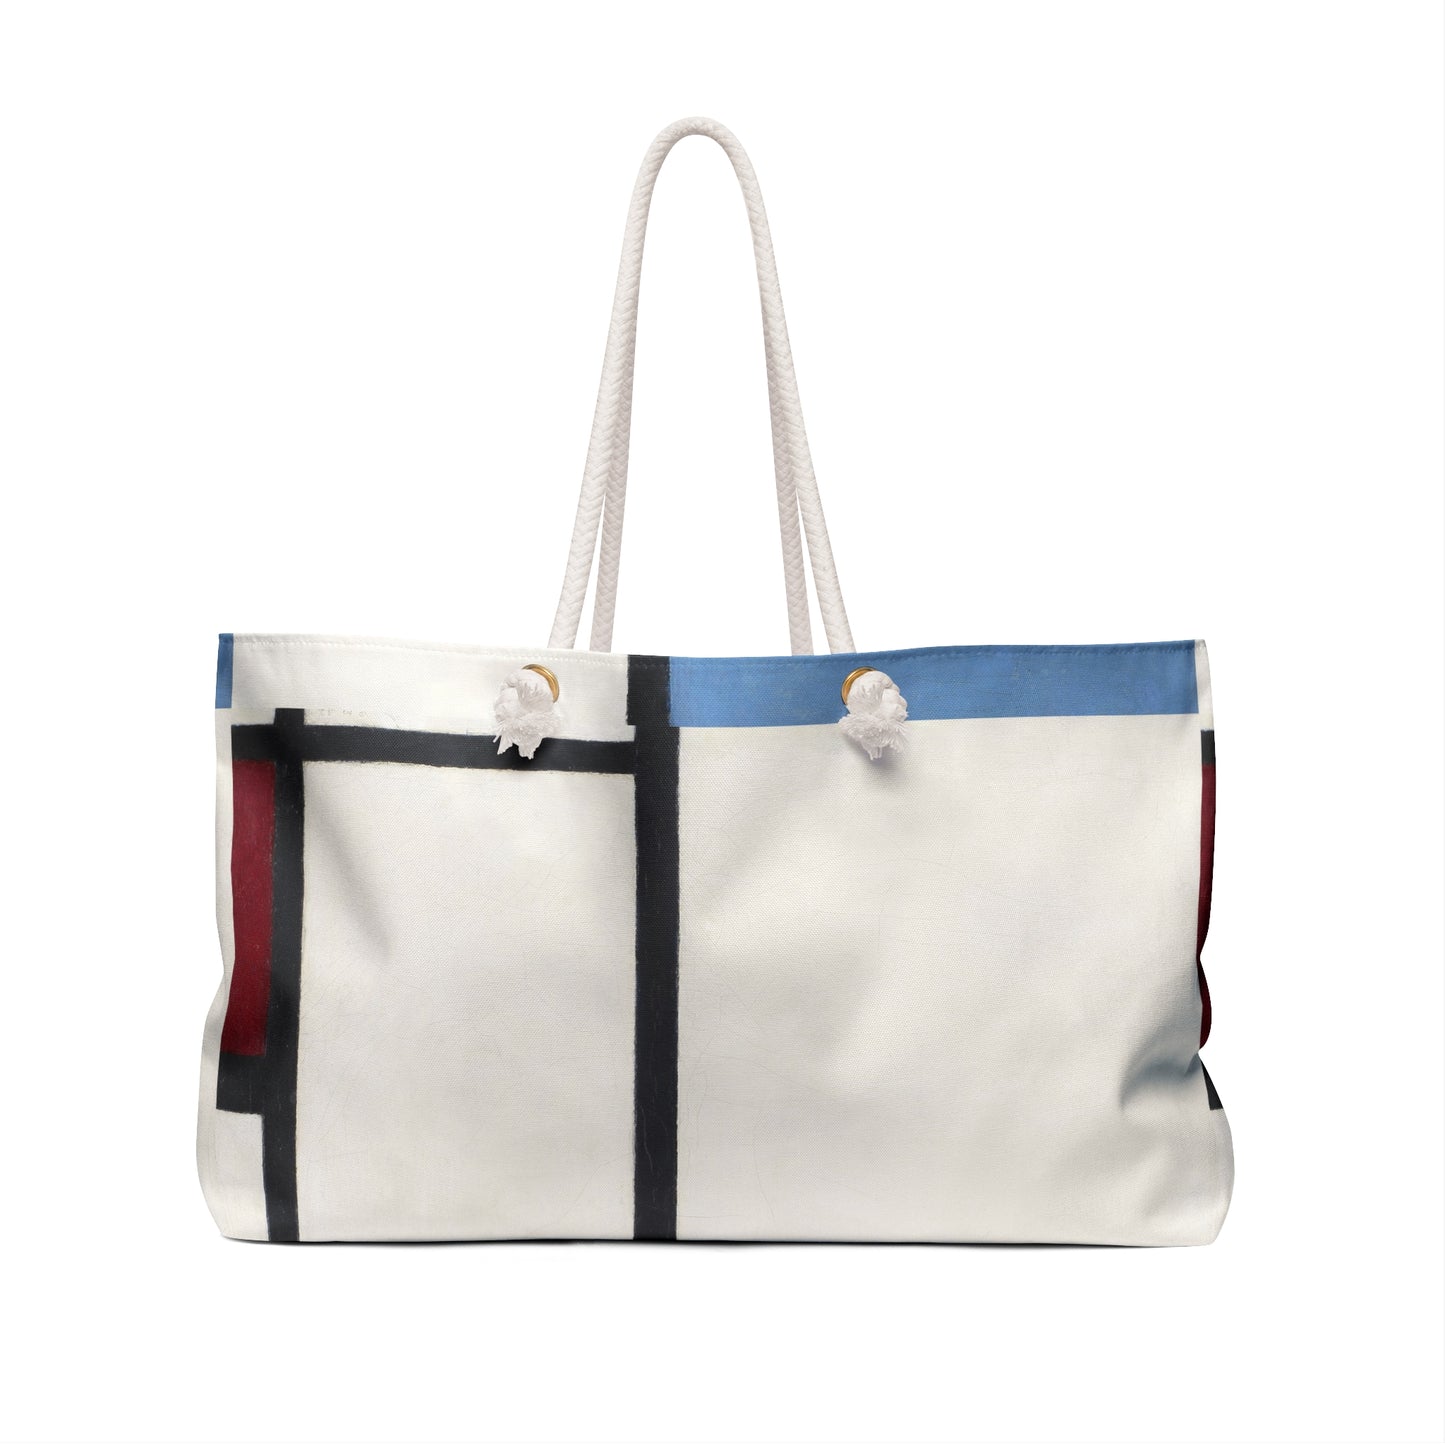 PIET MONDRIAN - COMPOSITION WITH BLUE AND RED - WEEKENDER TOTE BAG 